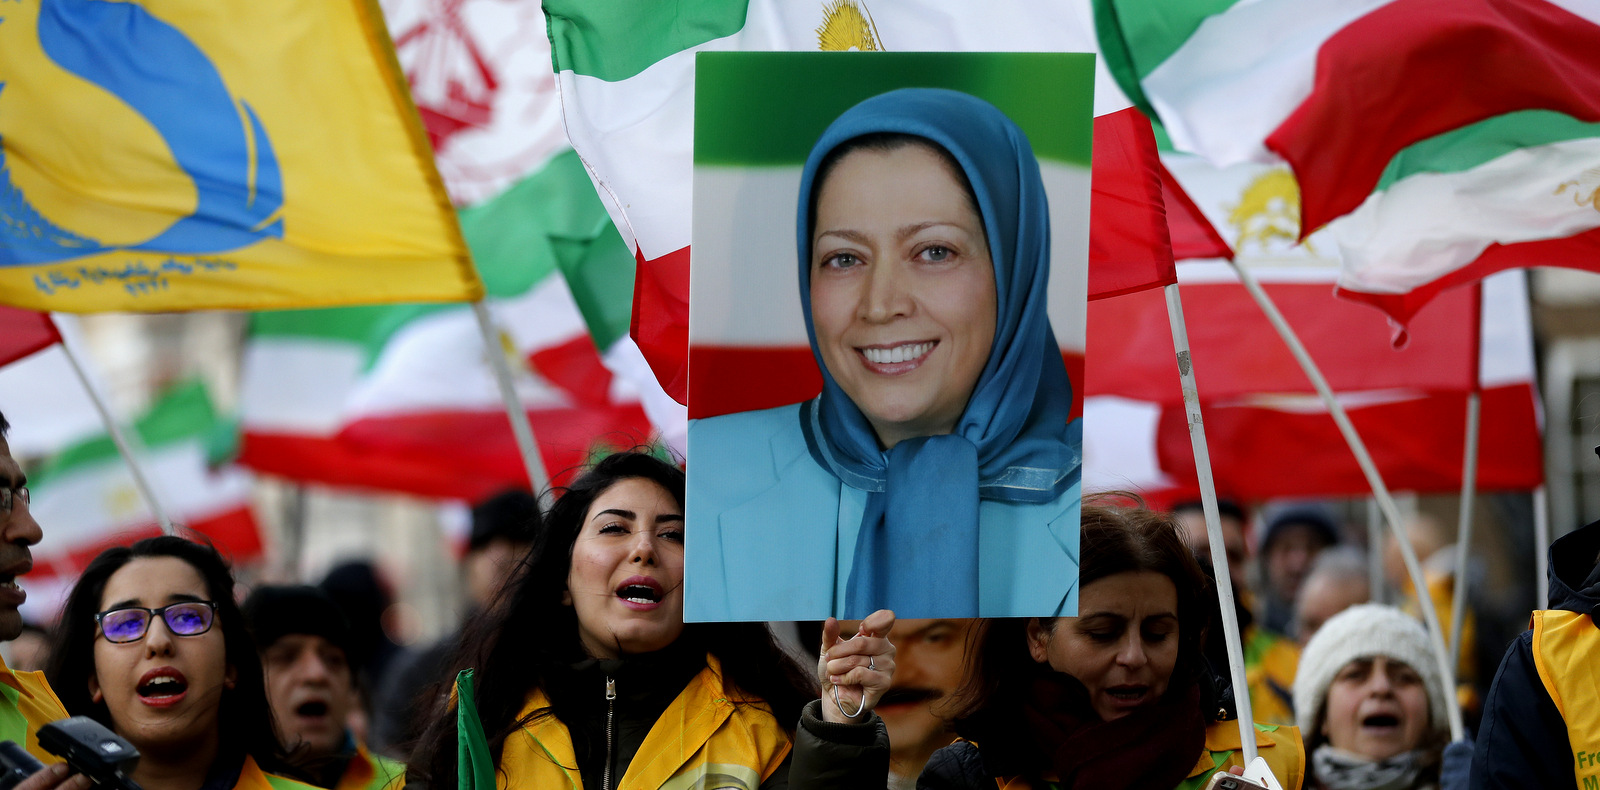 Supporters of Iran's National Council of Resistance of Iran (NCRI) hold a rally opposite the entrance of 10 Downing Street in London, Jan. 4, 2018, the woman pictured is former MEK leader Maryam Rajavi. (AP/Frank Augstein)